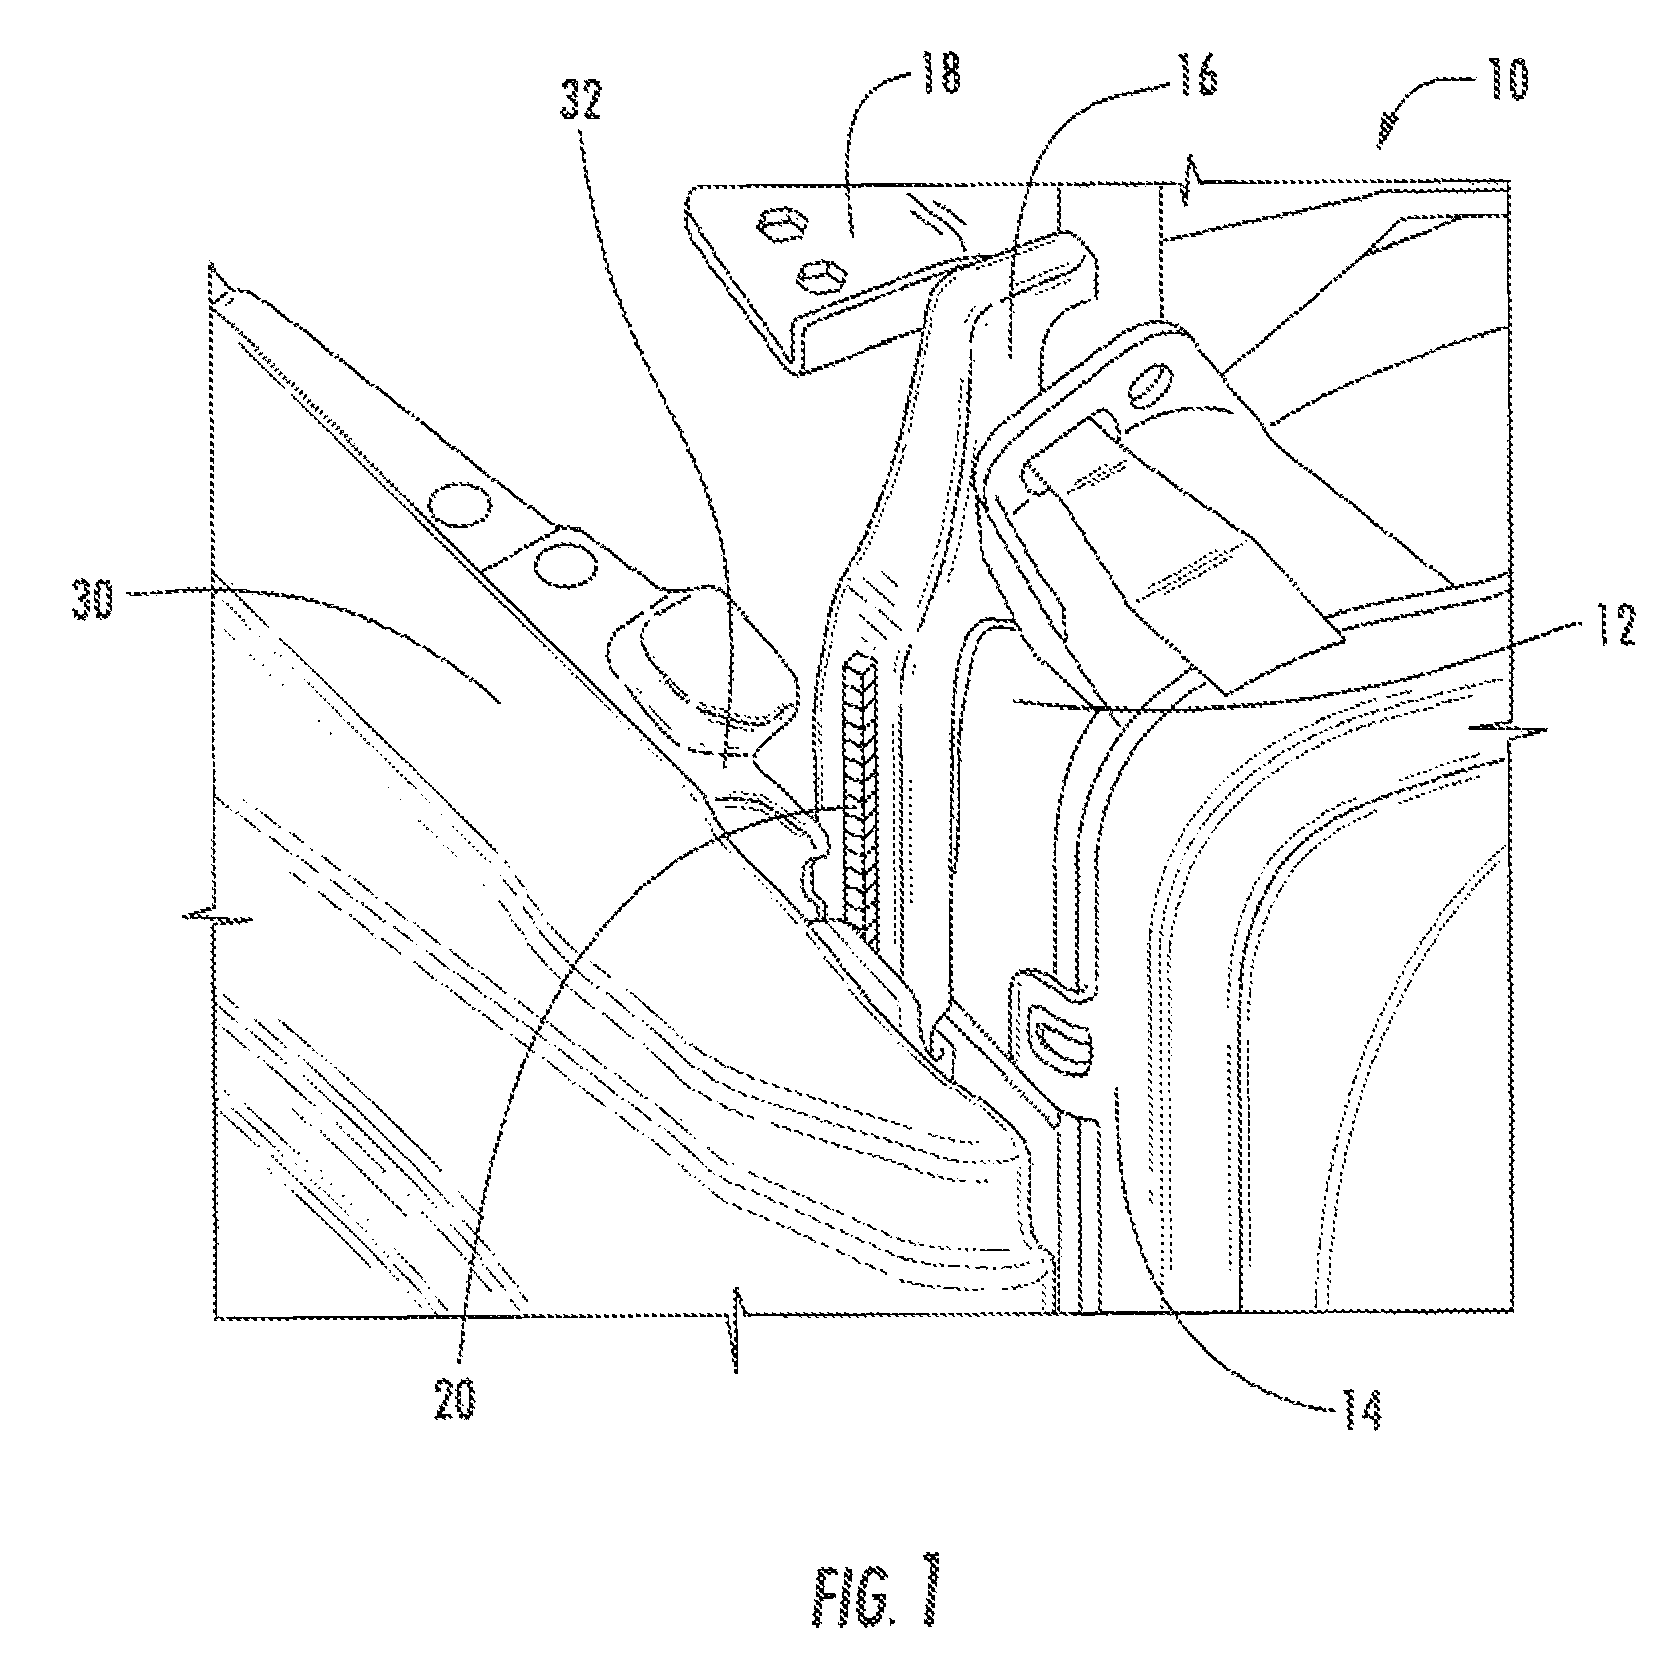 Systems and methods for assembling a front end module to a vehicle